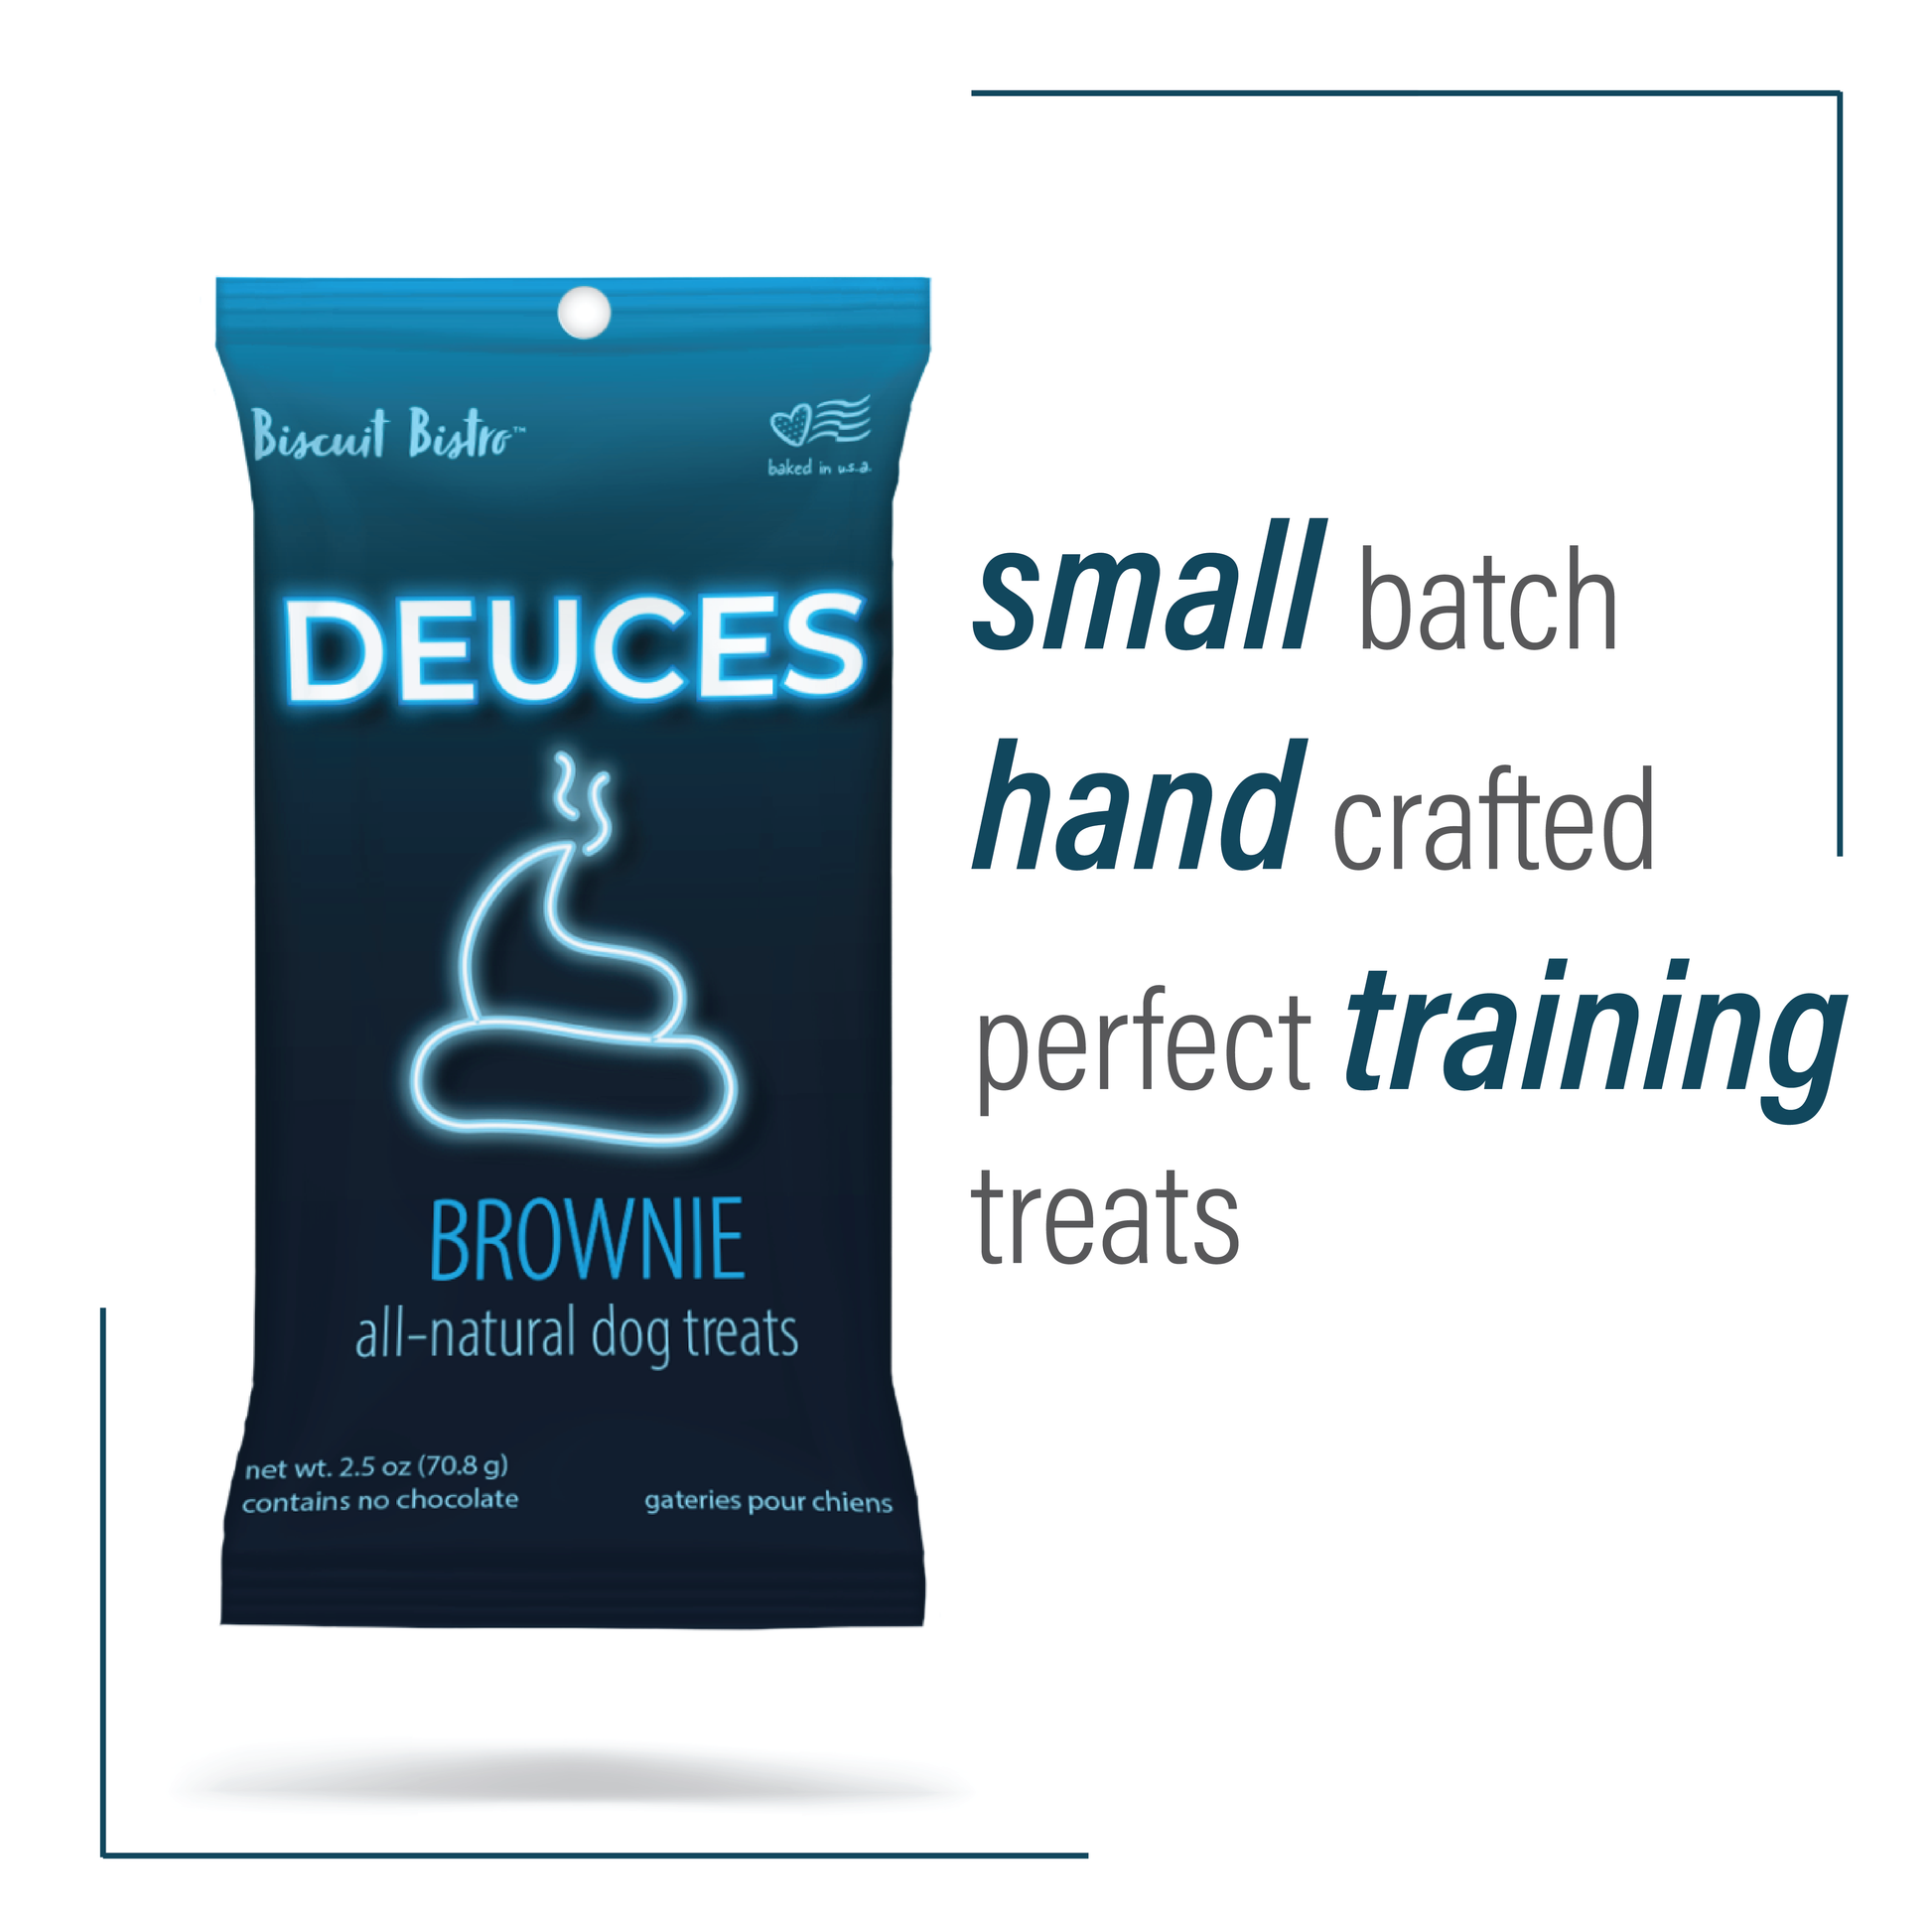 front view of Deuces treat bag. Text on right says "small batch hand crafted perfect training treats"